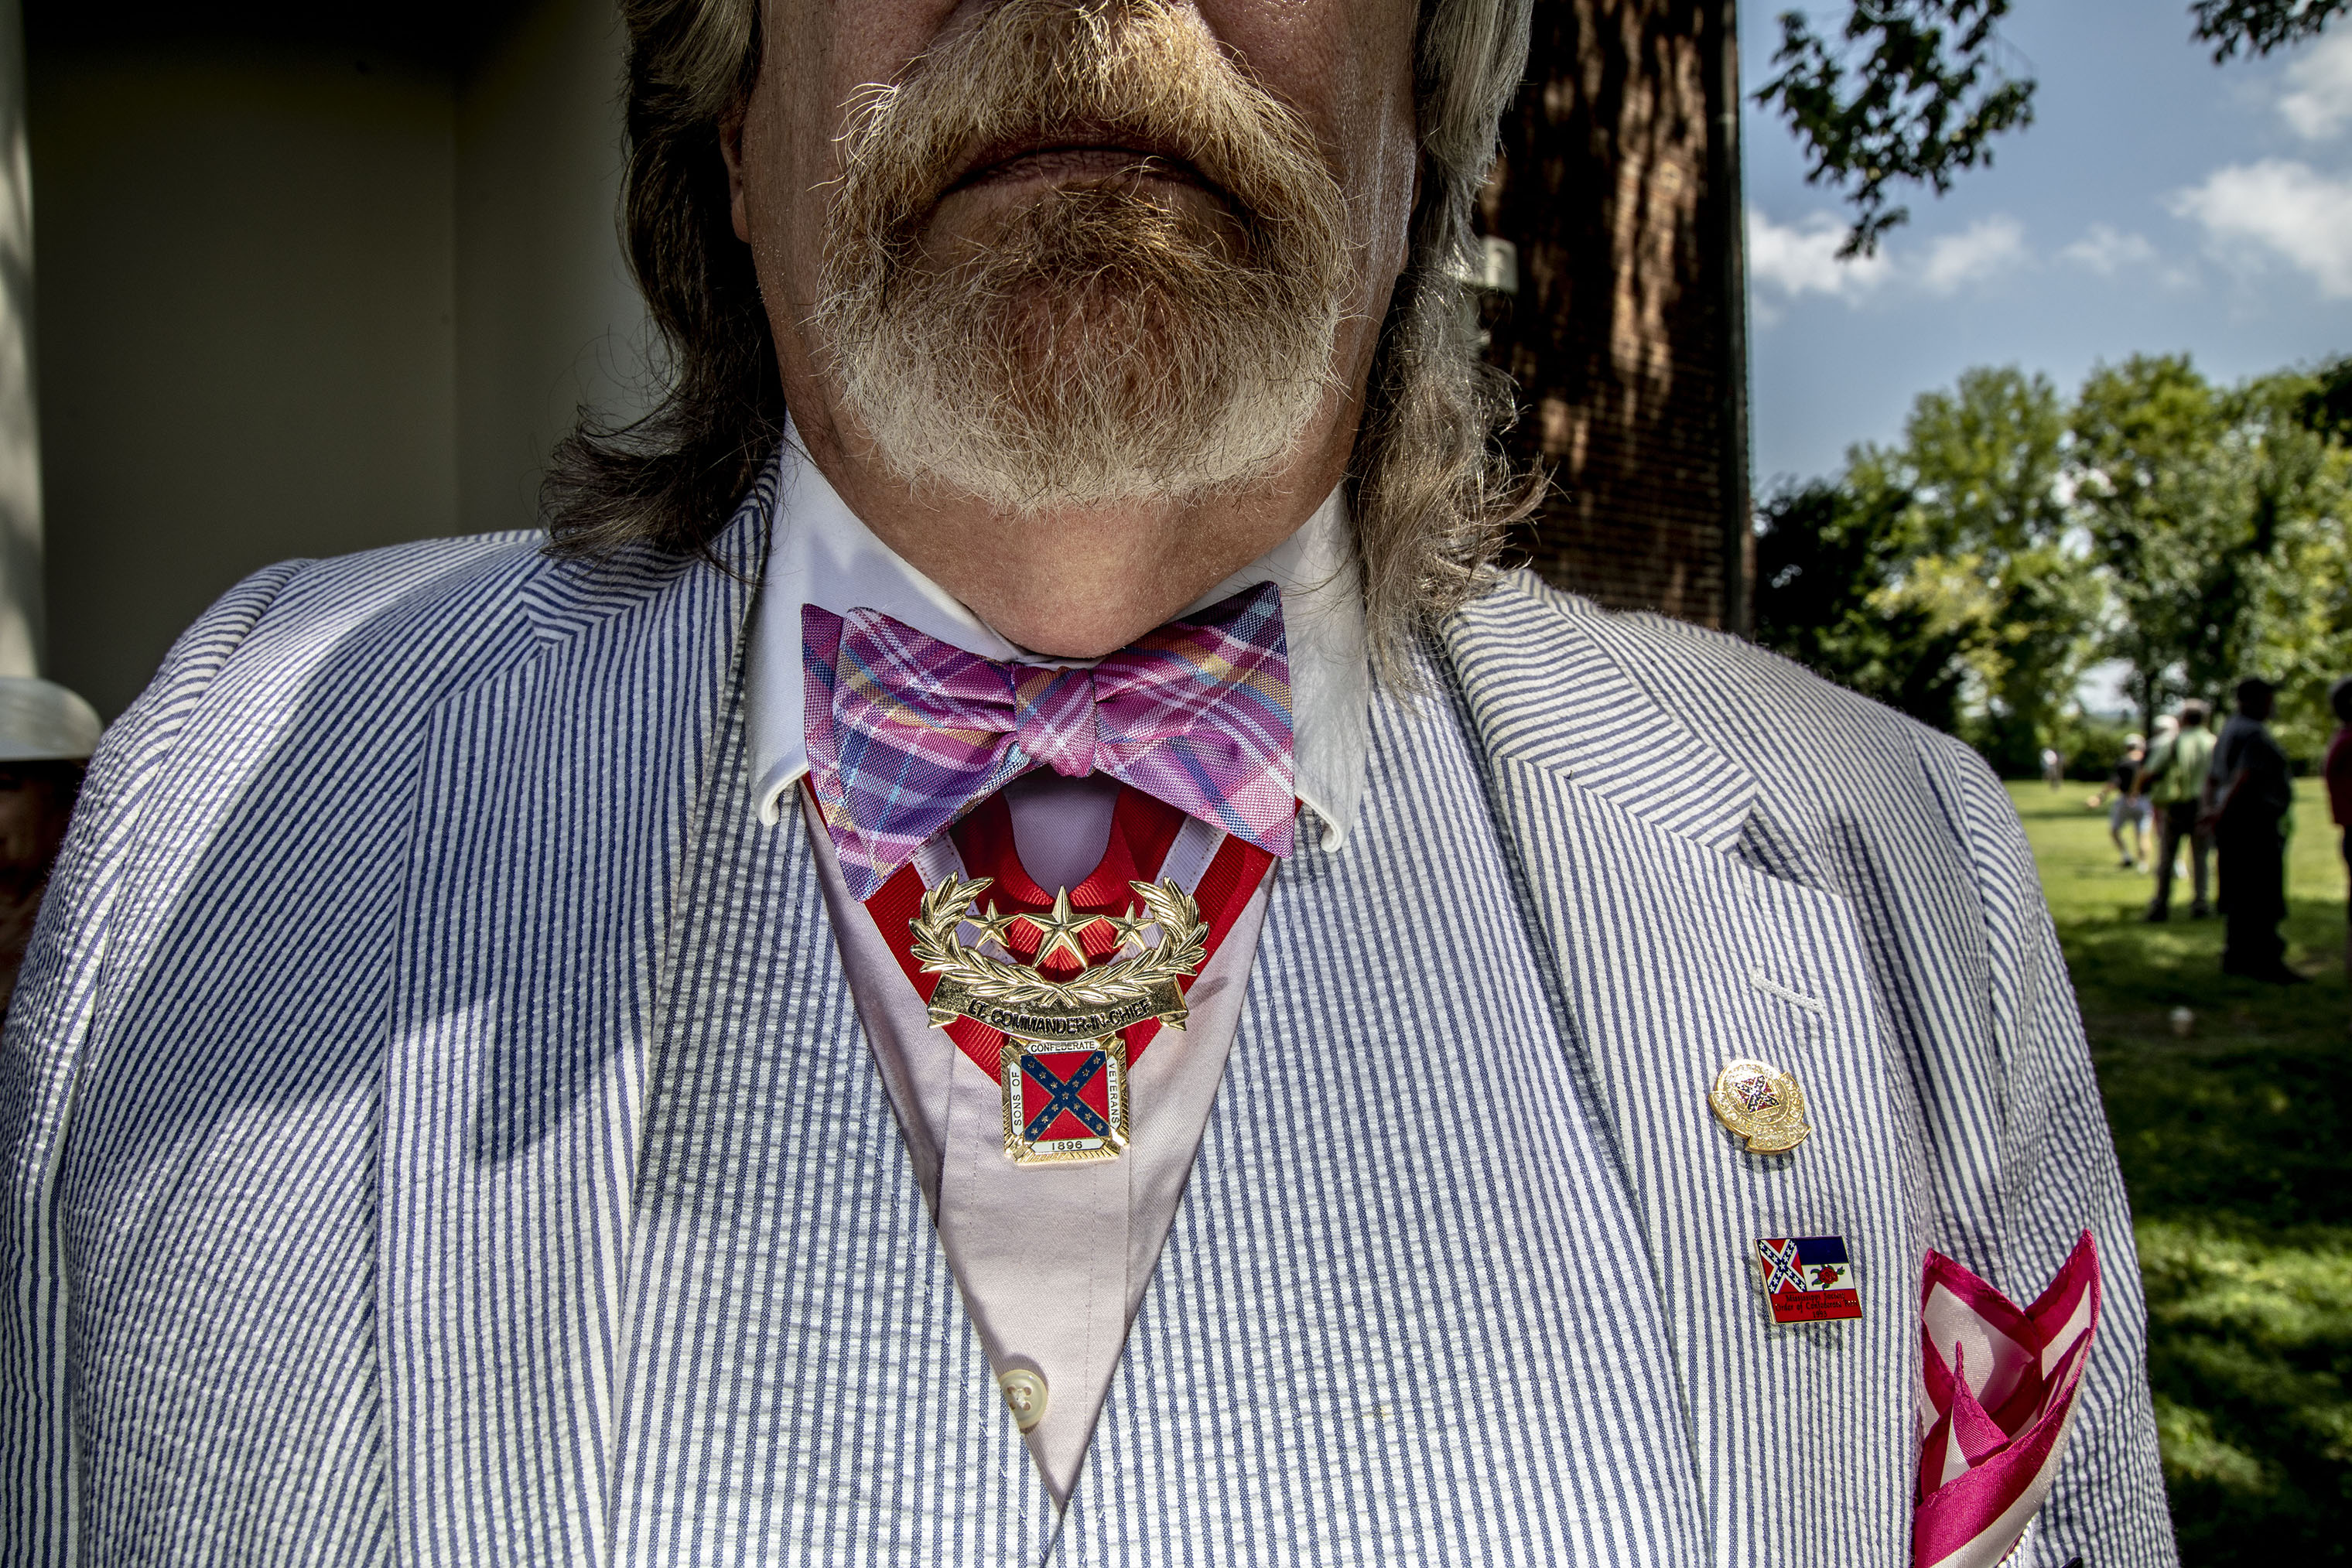 Vice commander of the Sons of Confederate Veterans, Paul Gramling, attends the dedication. (Mark Peterson—Redux for TIME)